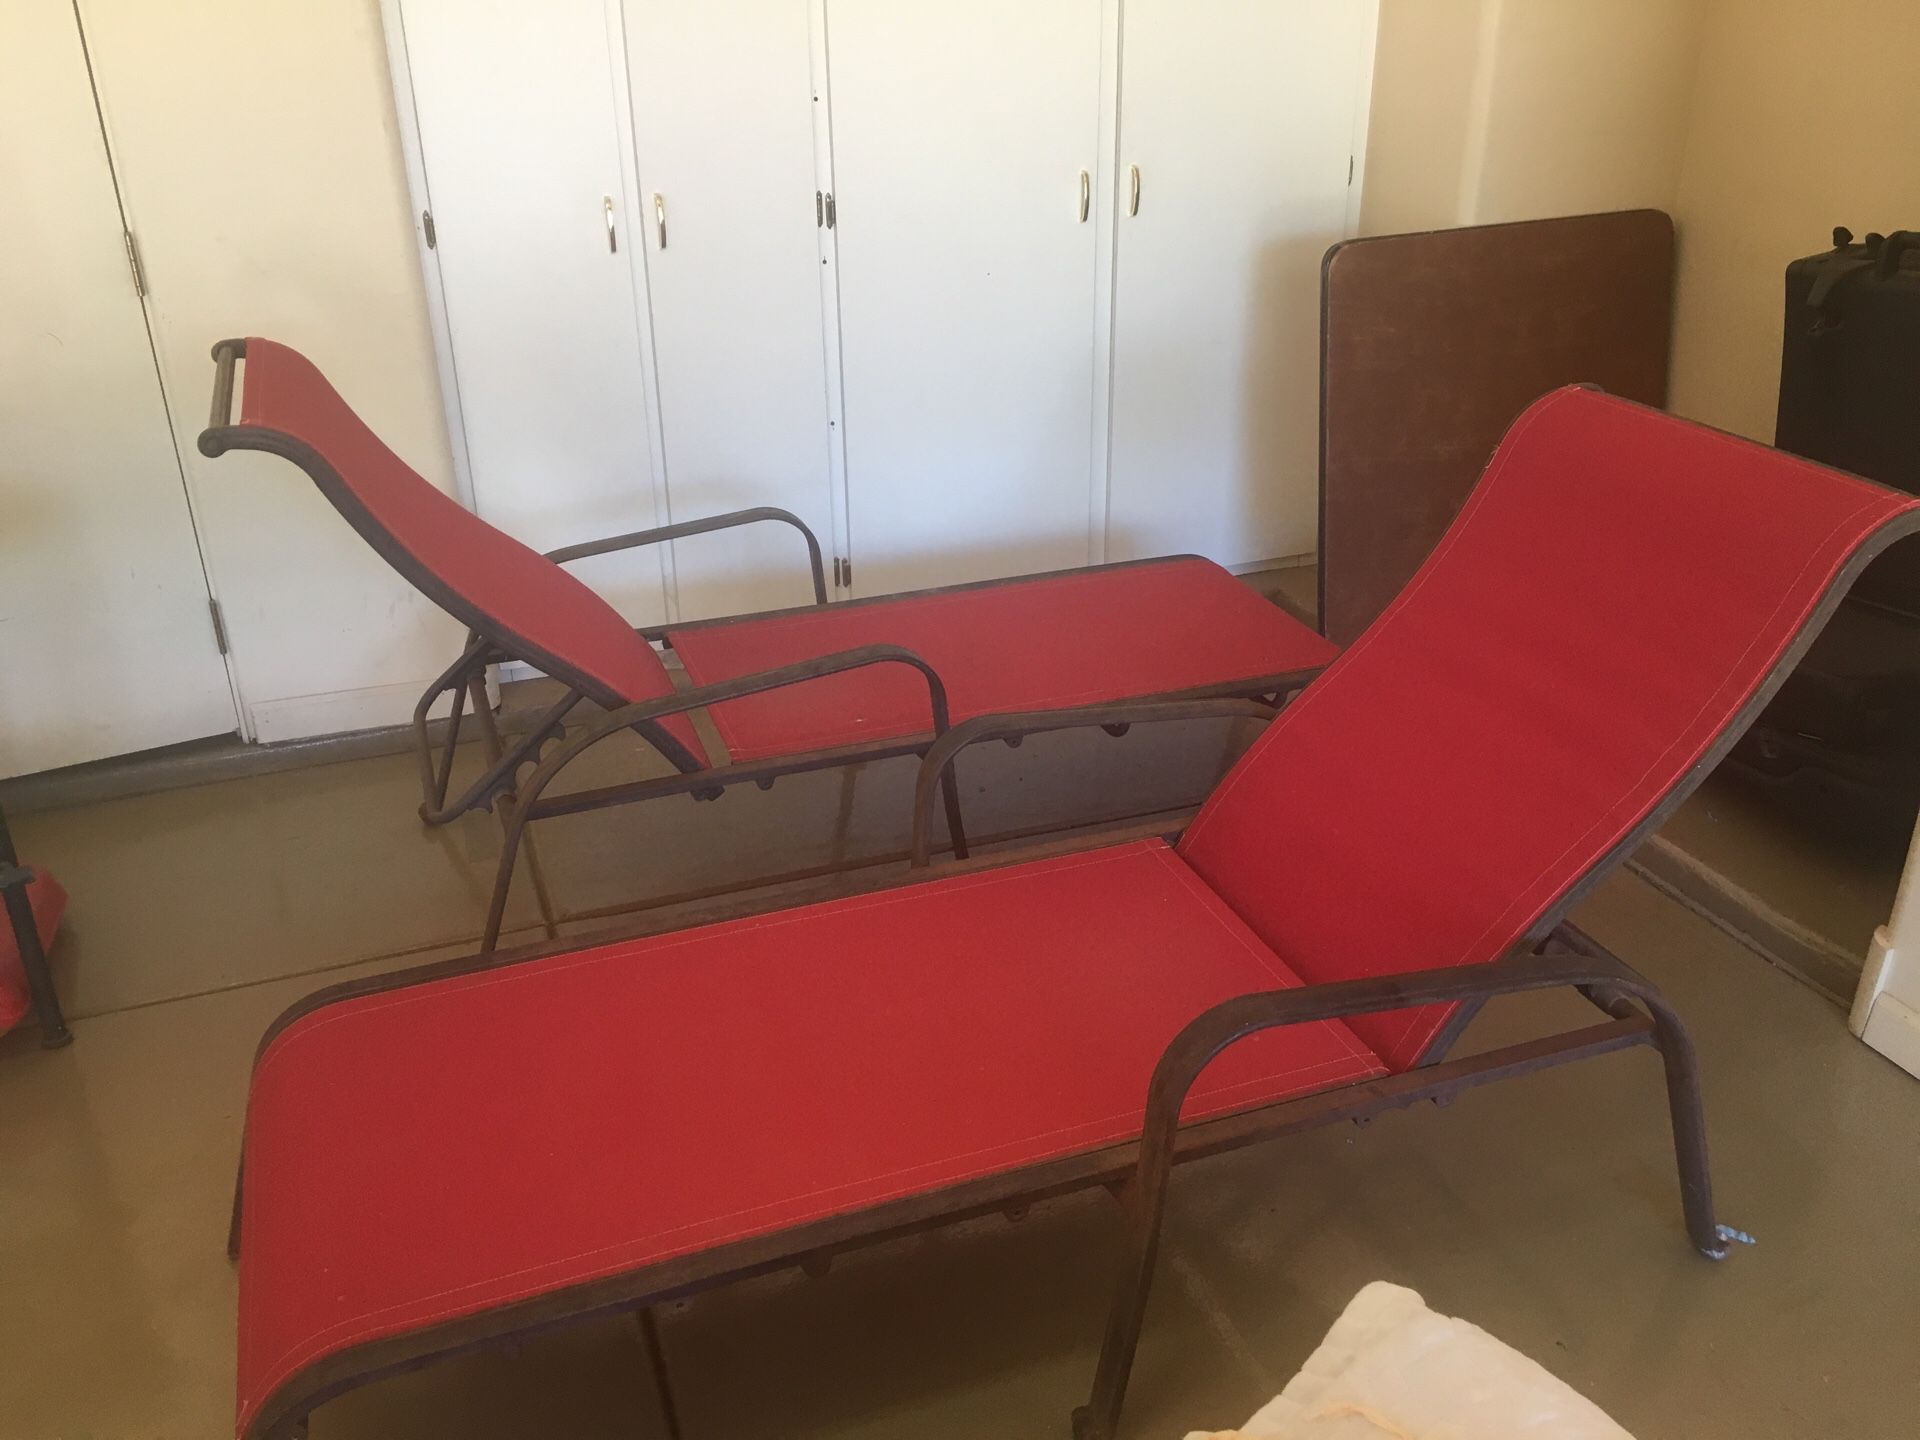 Chase lounge chairs